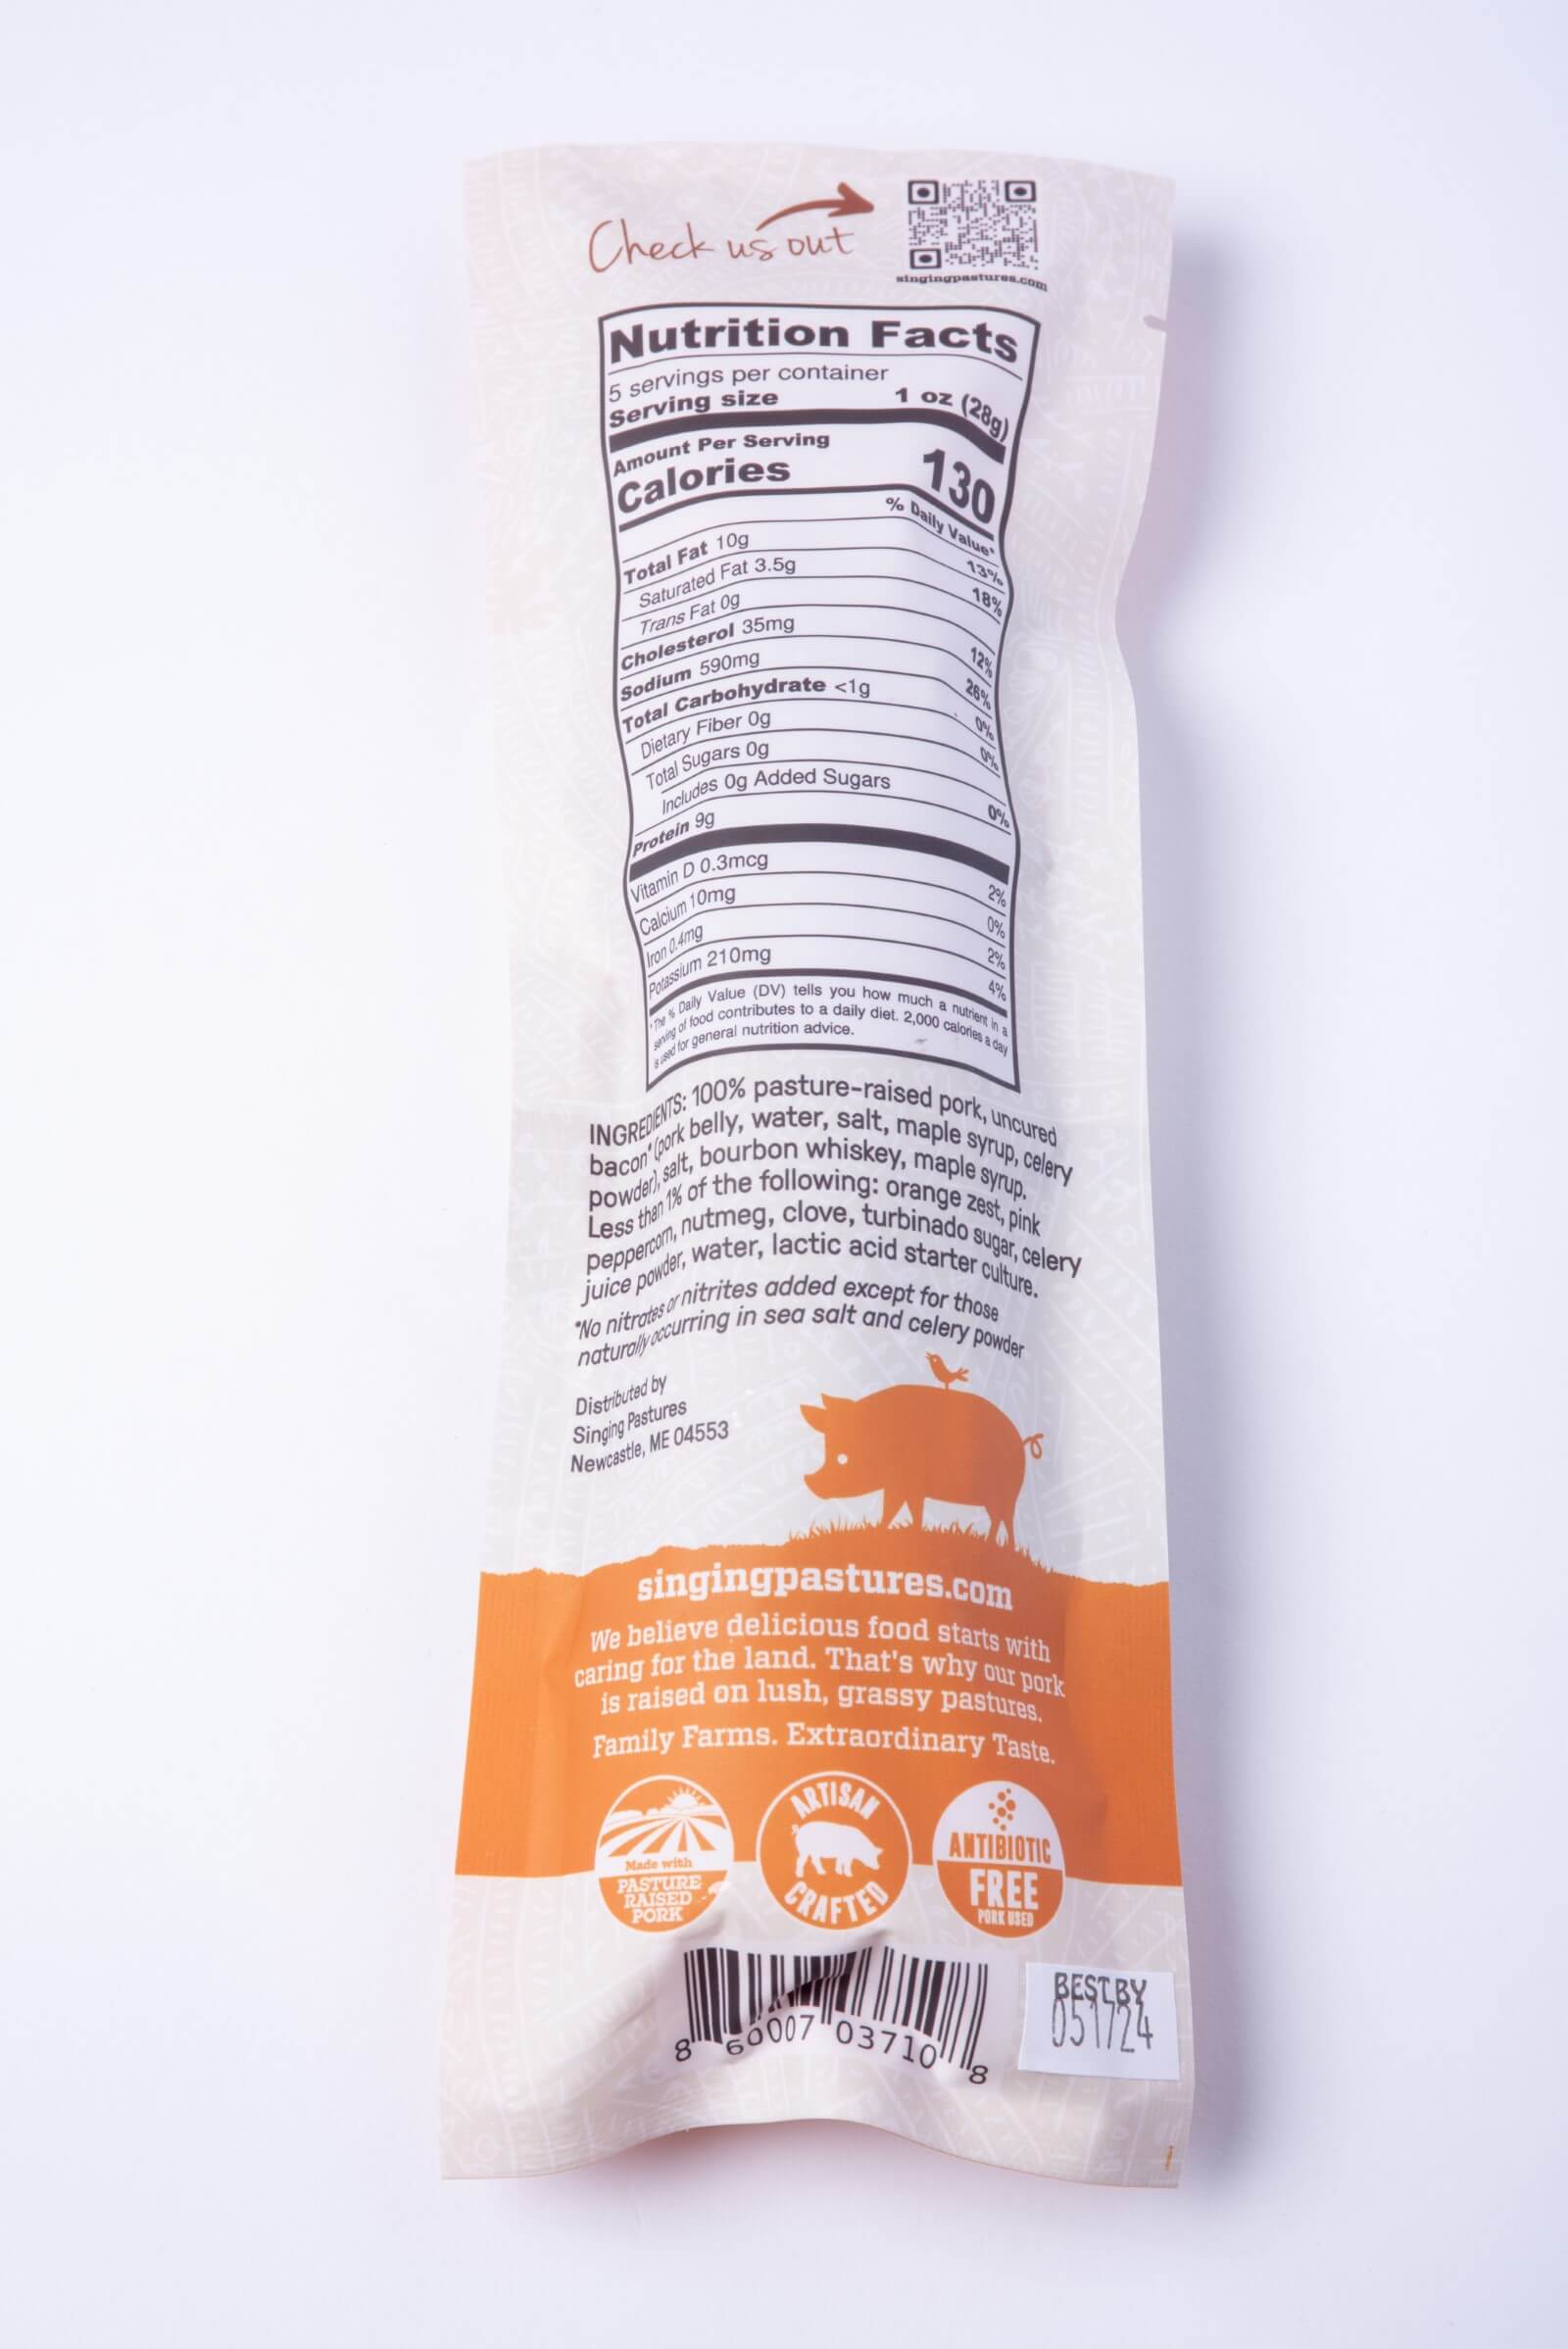 Bourbon & Uncured Bacon Salami Package, with Back Panel Information